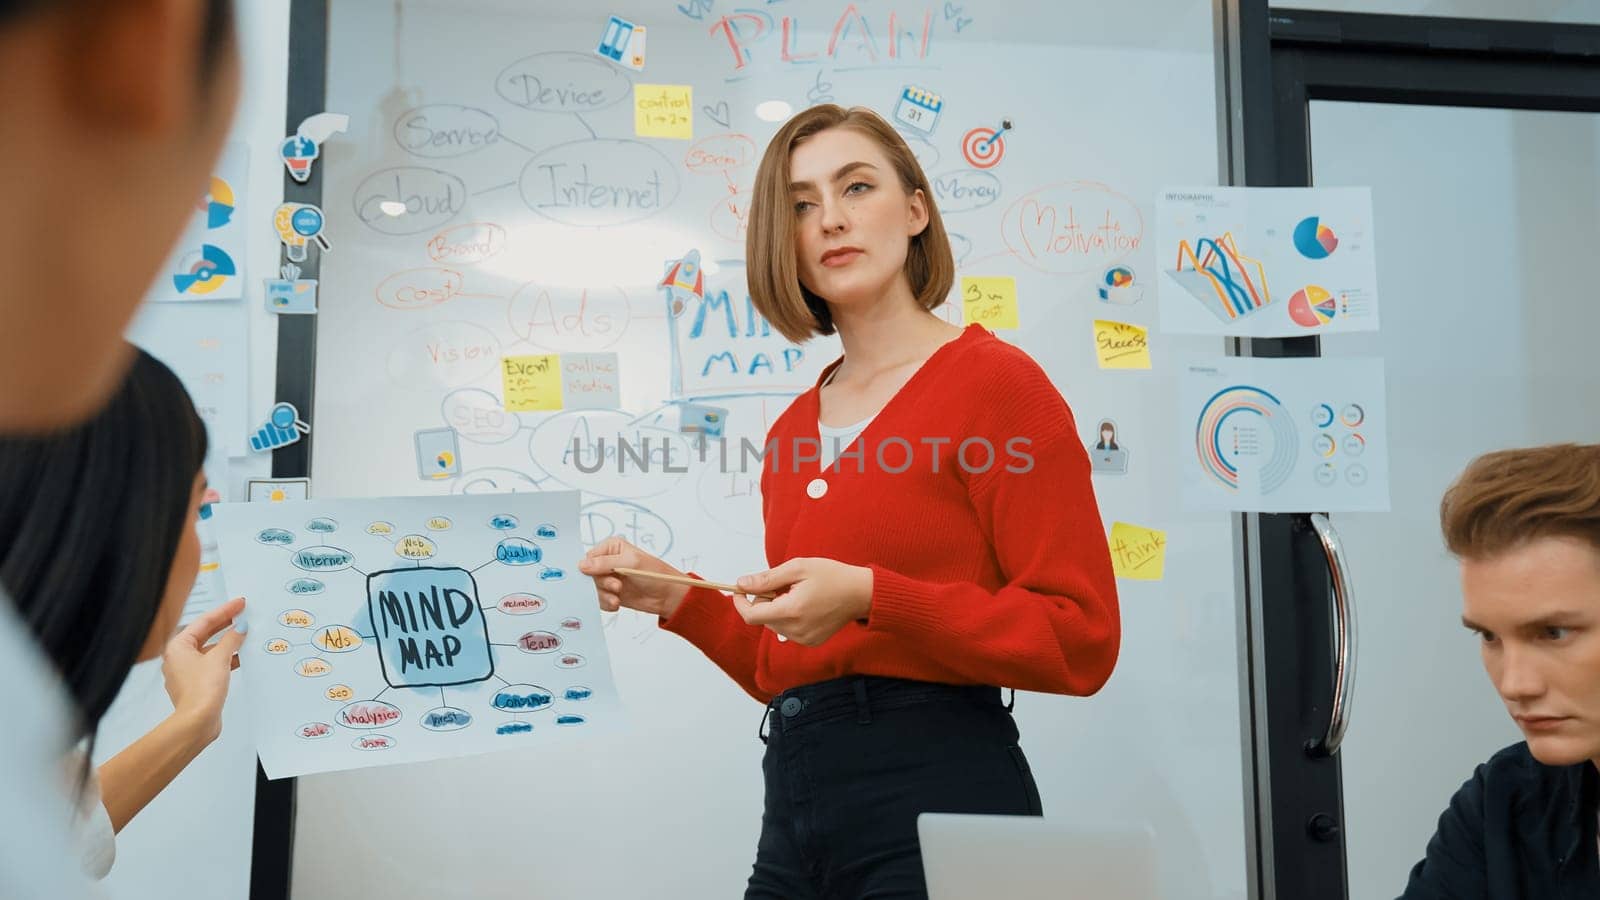 Professional young leader present business idea by using mind map at business meeting surrounded by professional cooperate colleague discussing and brainstorming about her strategy. Immaculate.